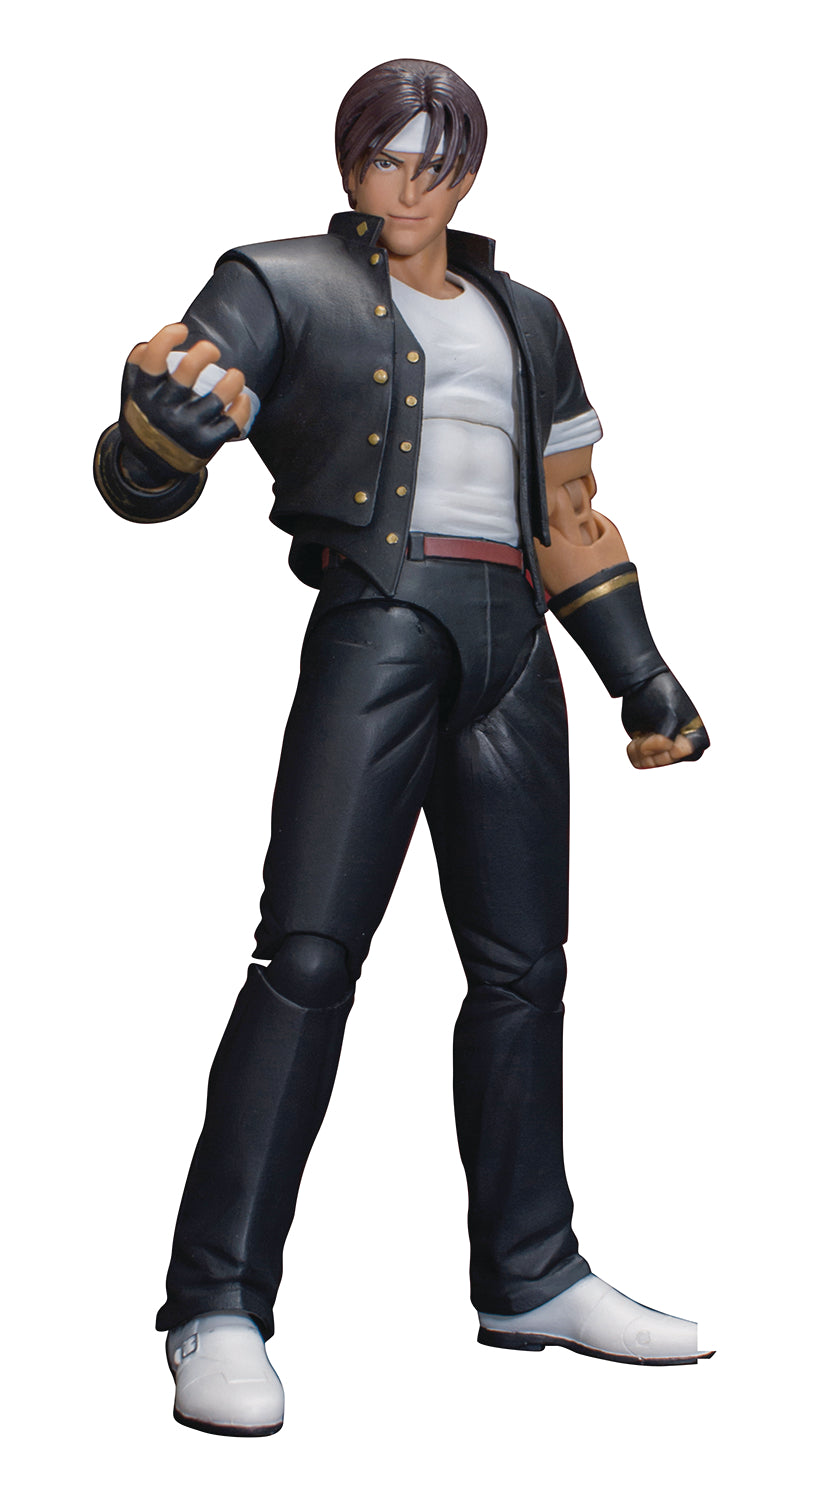 STORM COLLECTIBLES KING OF FIGHTERS KYO KUSANAGI 1/12 ACTION FIGURE